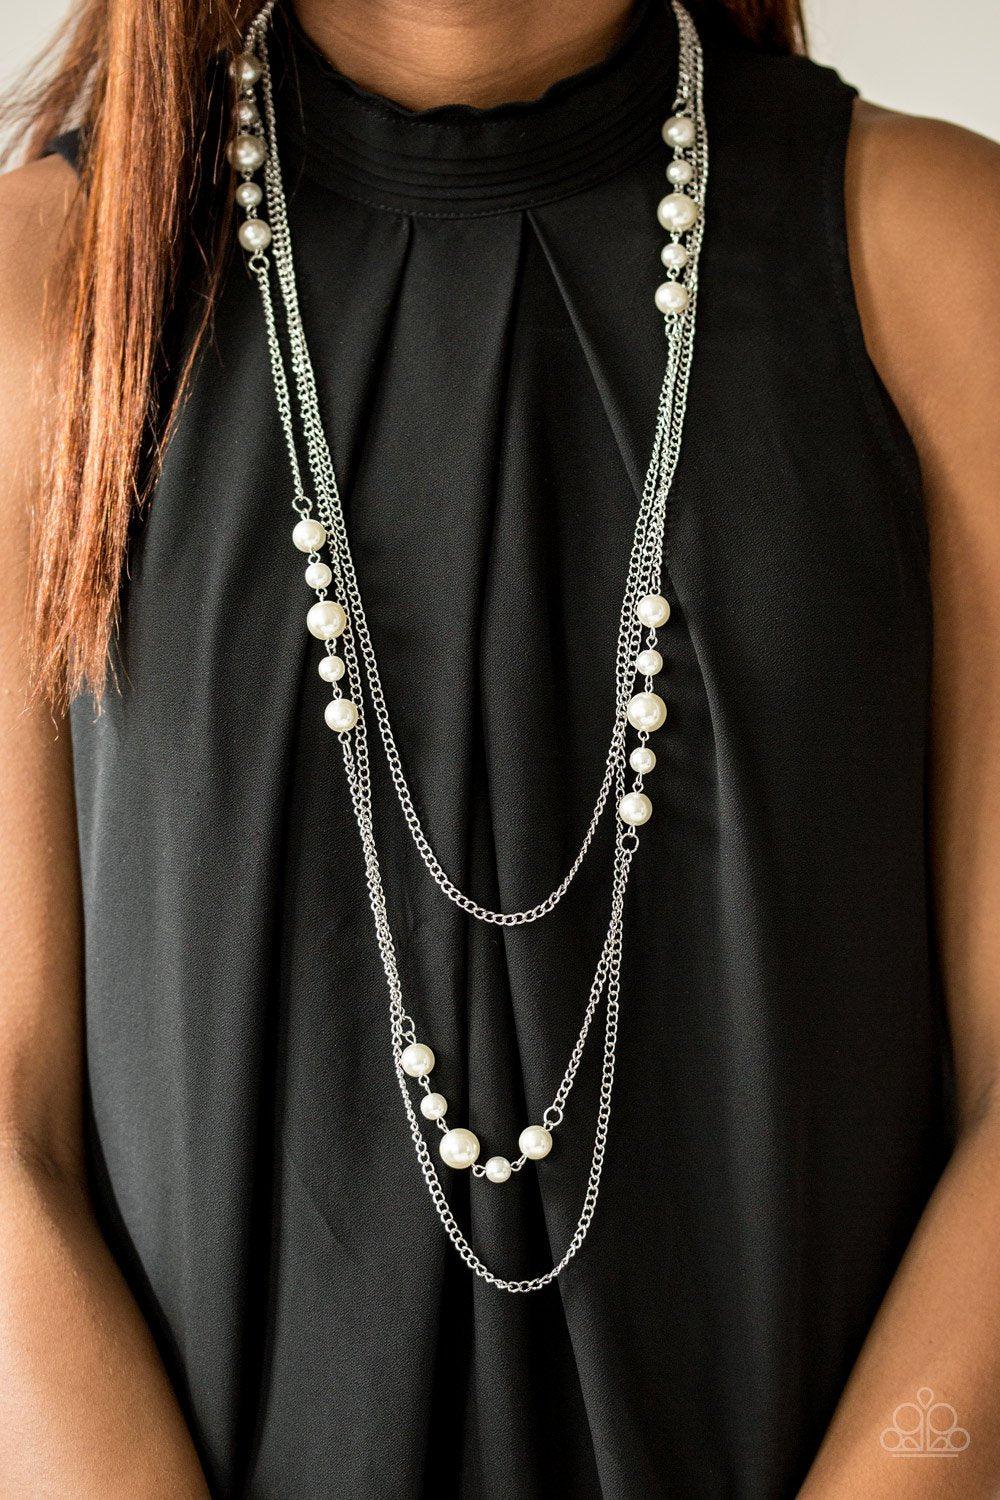 Diva Dilemma Silver and White Pearl Necklace - Paparazzi Accessories-CarasShop.com - $5 Jewelry by Cara Jewels